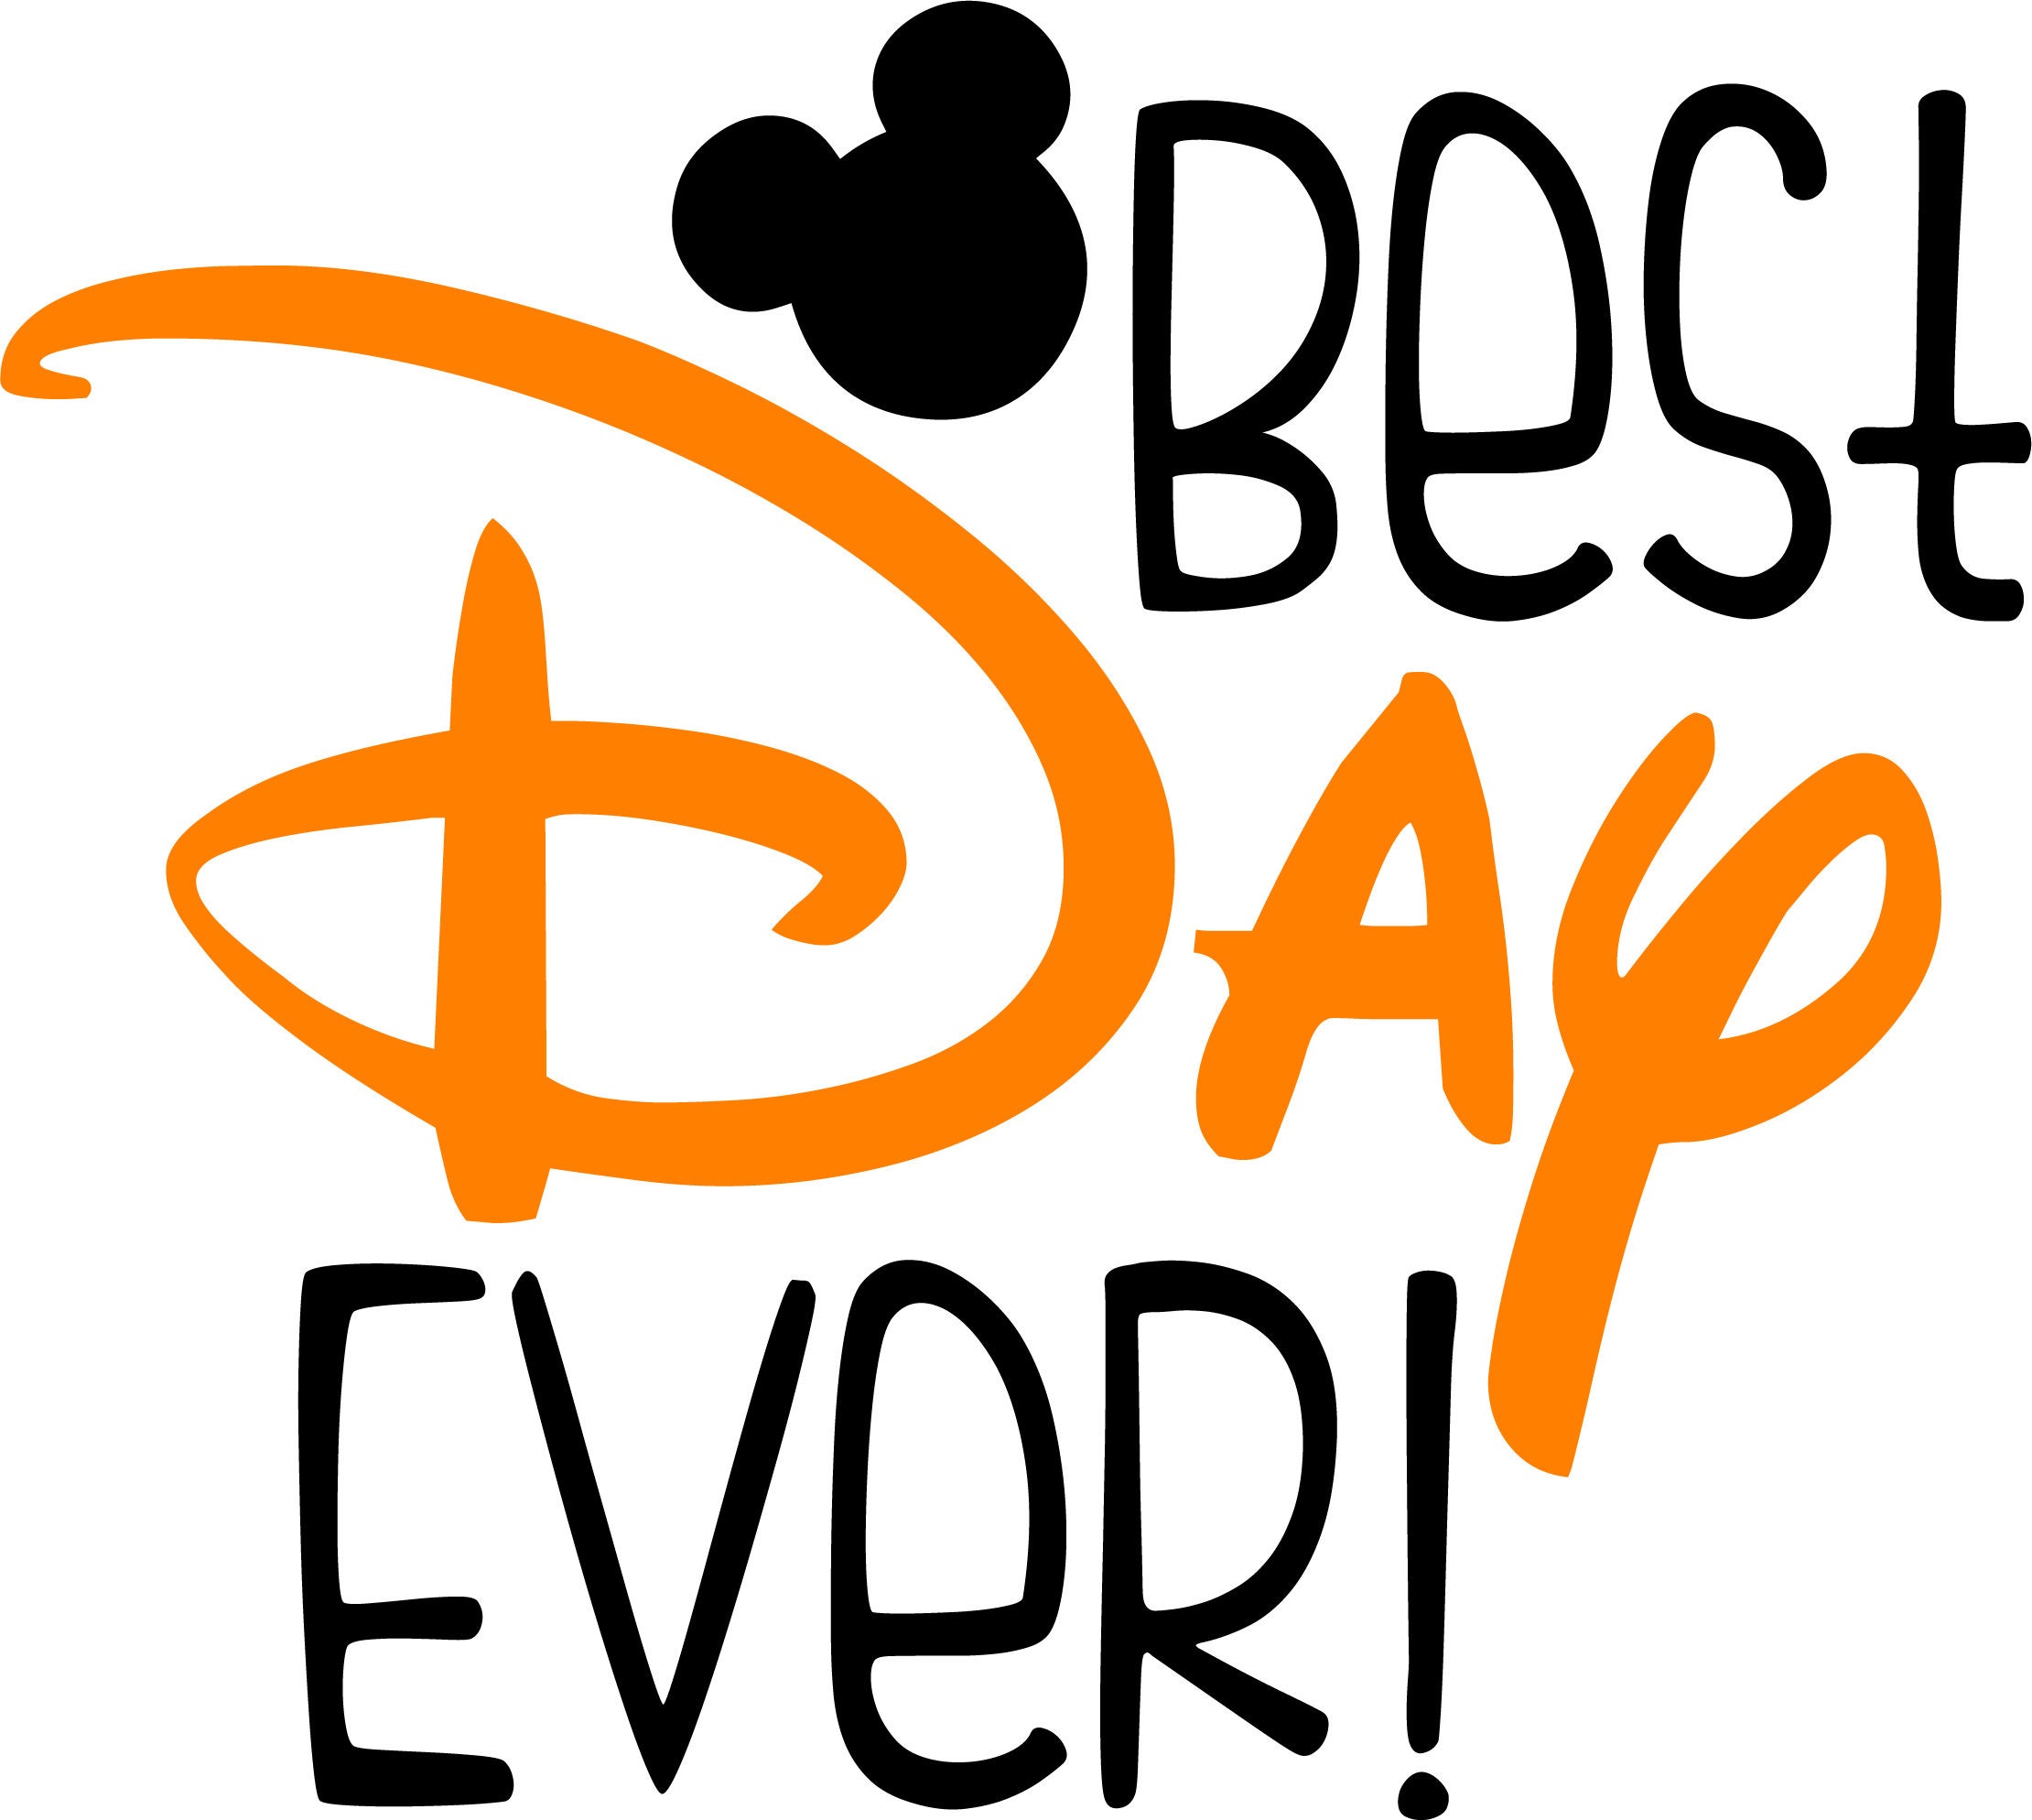 Download Best Day Ever SVG DXF EPS jpg png file: Great for your